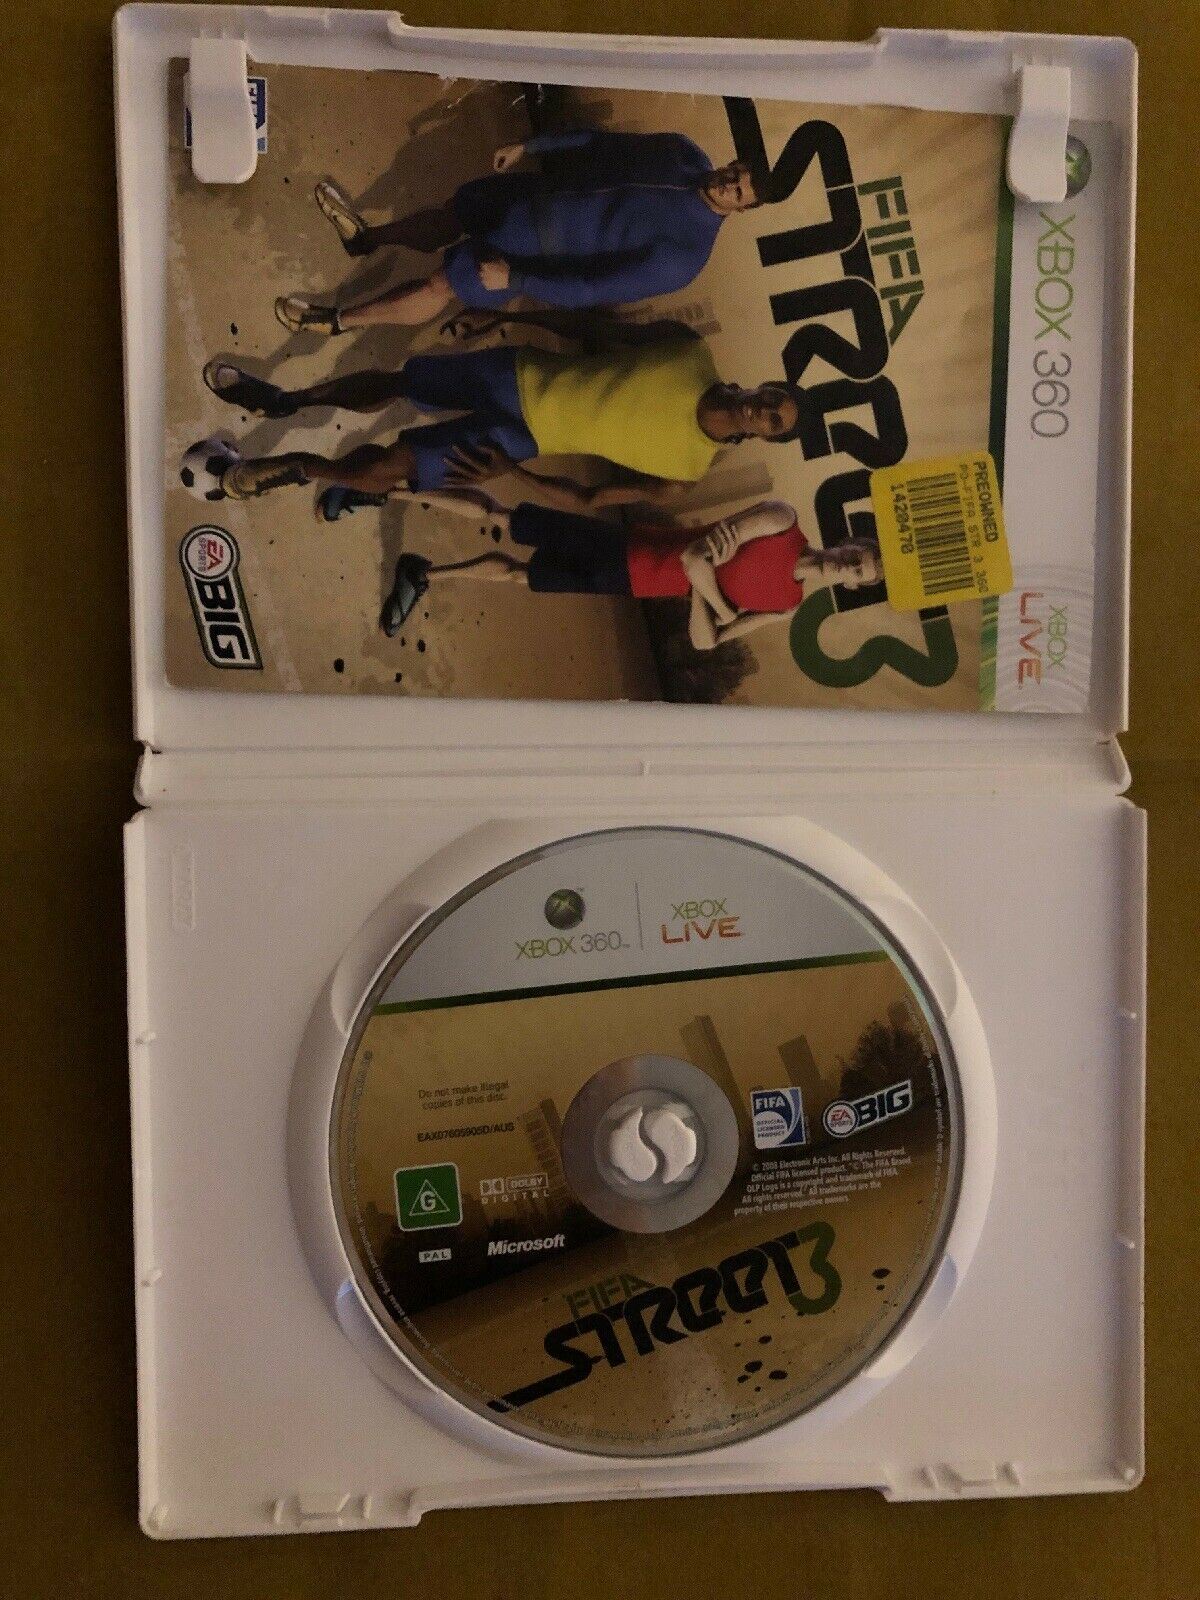 FIFA STREET 3 - Microsoft XBOX 360 Complete With Manual